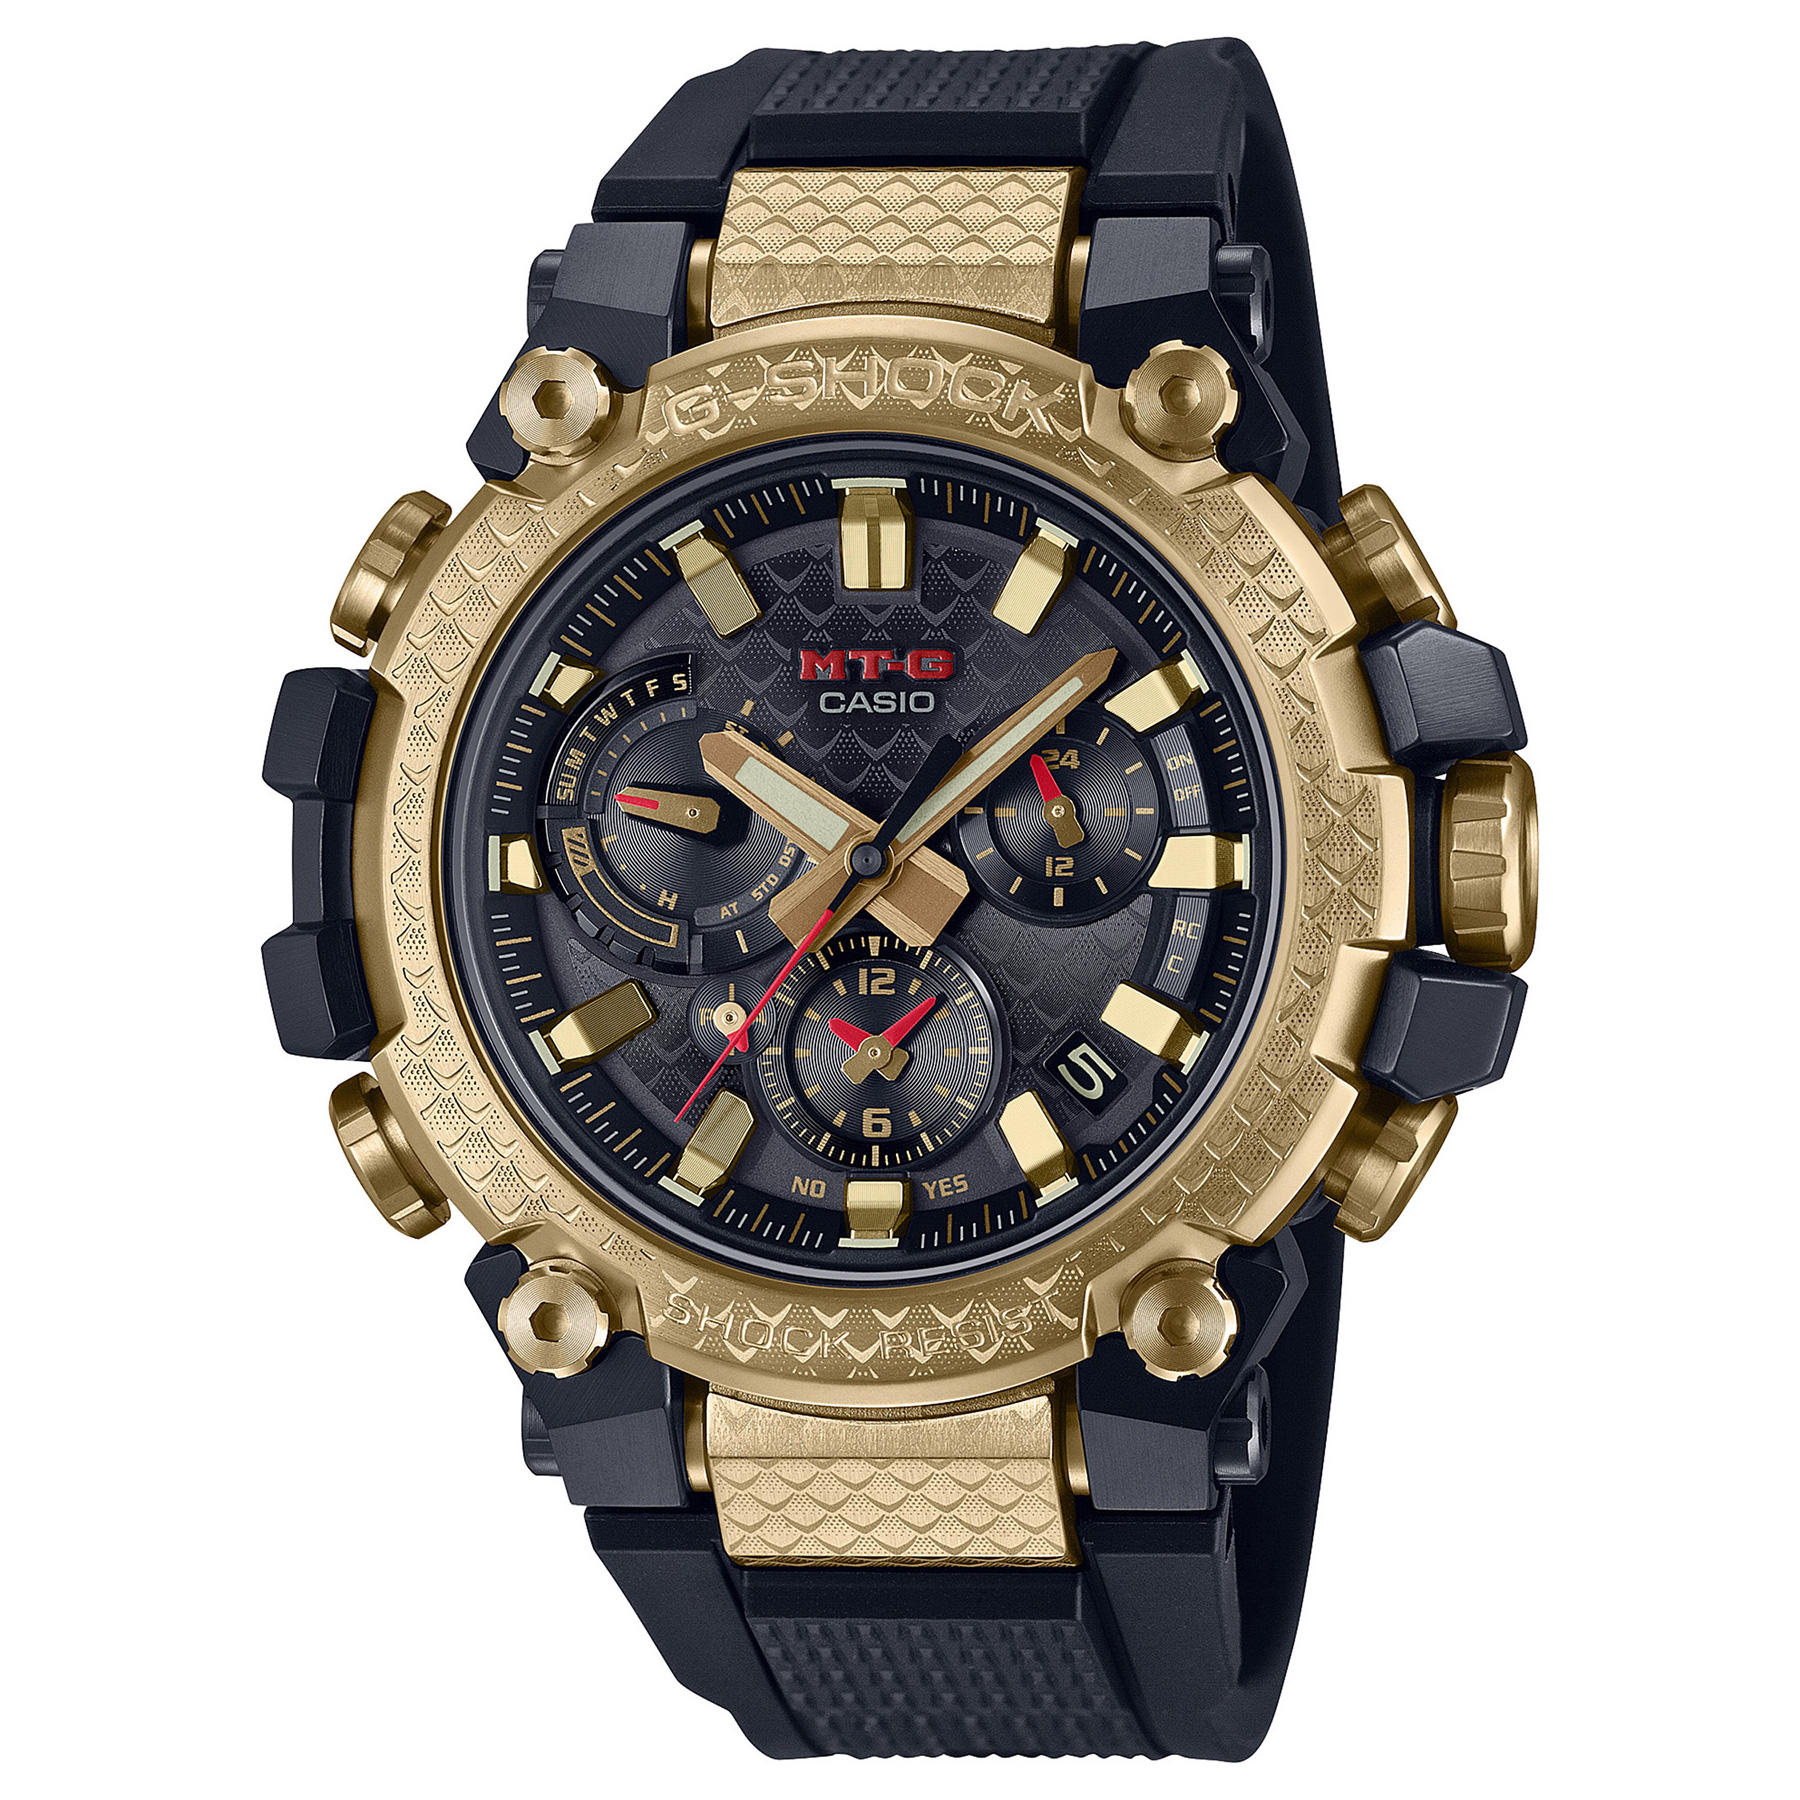 Casio G-Shock MT-G Year of the Dragon Black Resin Strap Solar Connected Limited Edition Watch - MTGB3000CXD9